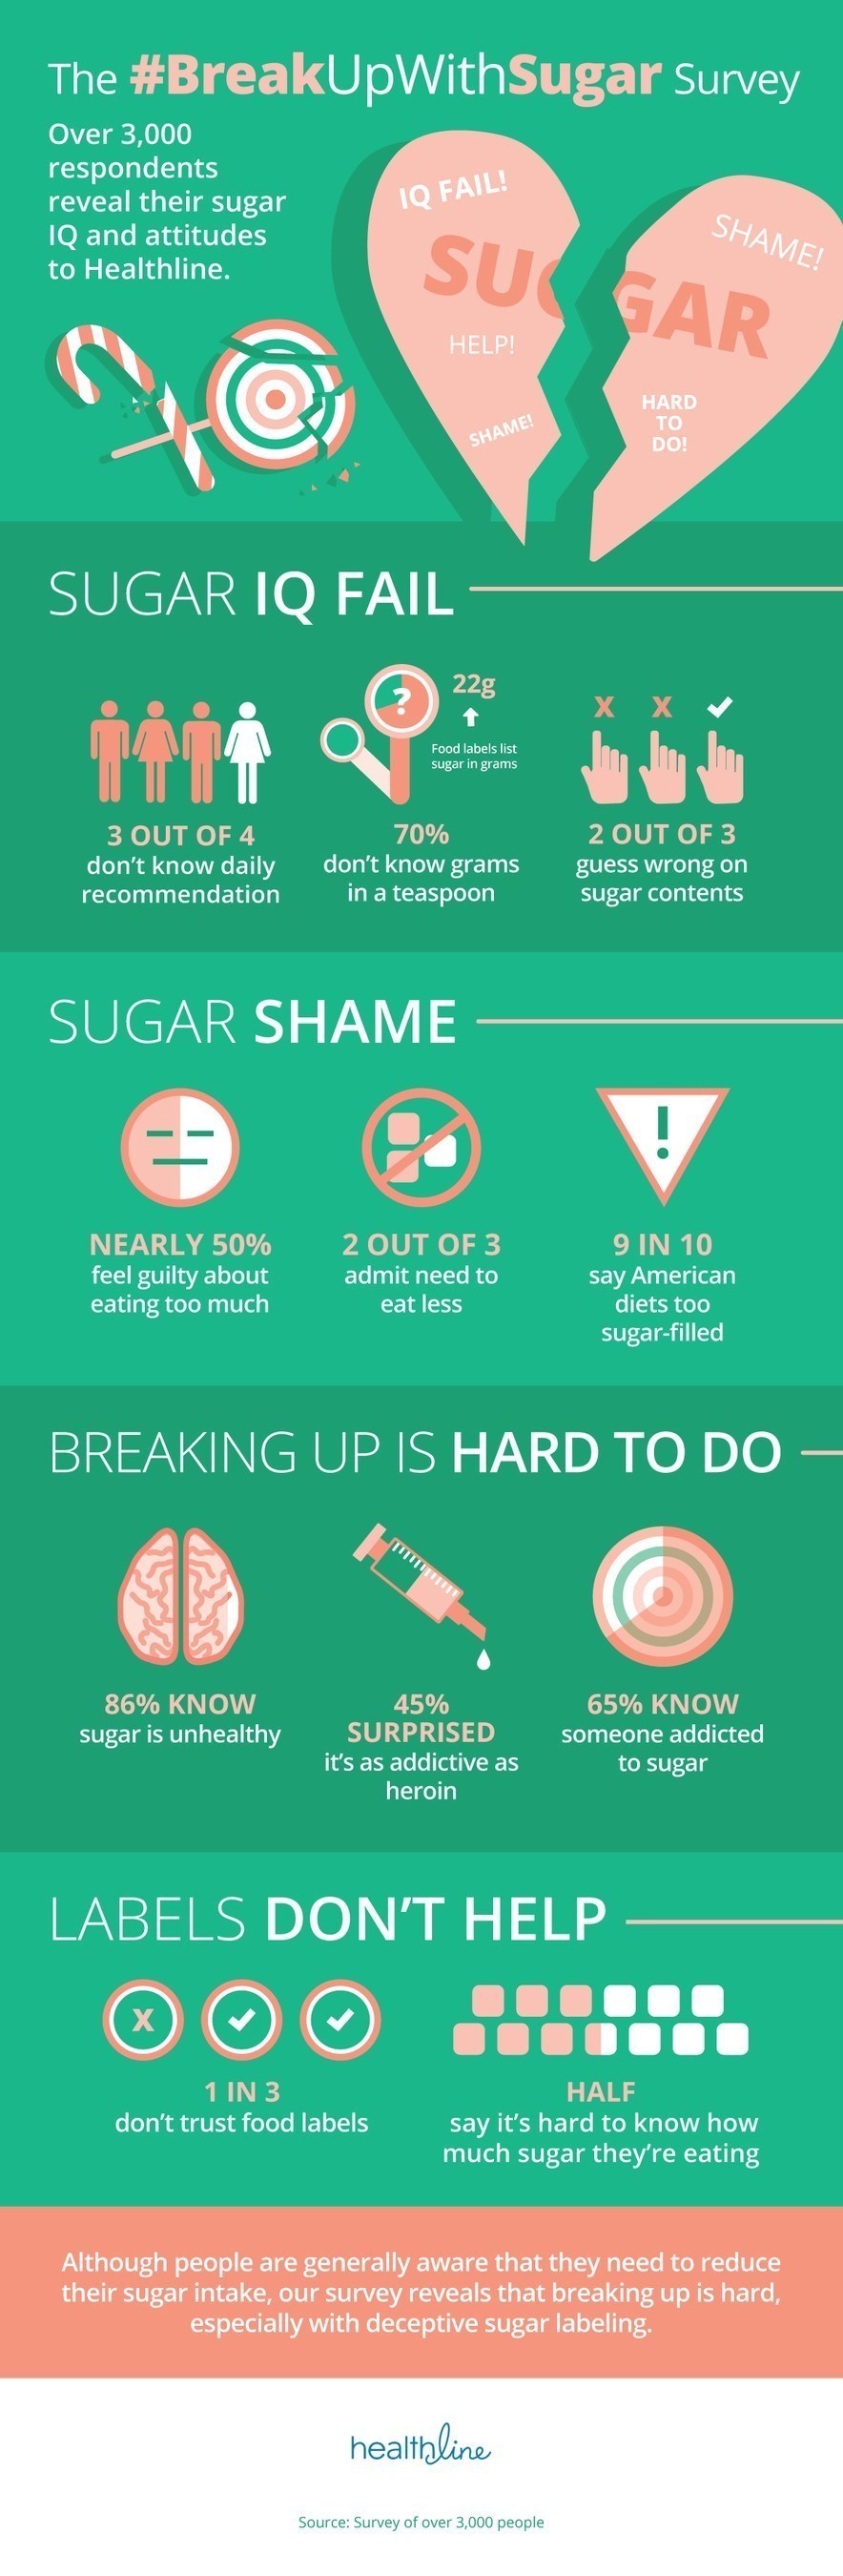 Healthline.com, the #2 health information website, conducted research among over 3,000 Americans on their knowledge of sugar and how it affects the body to gauge their relationship about their own sugar consumption and the effects it has on them. The Healthline Sugar Survey finds that while Americans are aware of the negative effects of sugar, they aren't doing much about it because they don't actually know how.